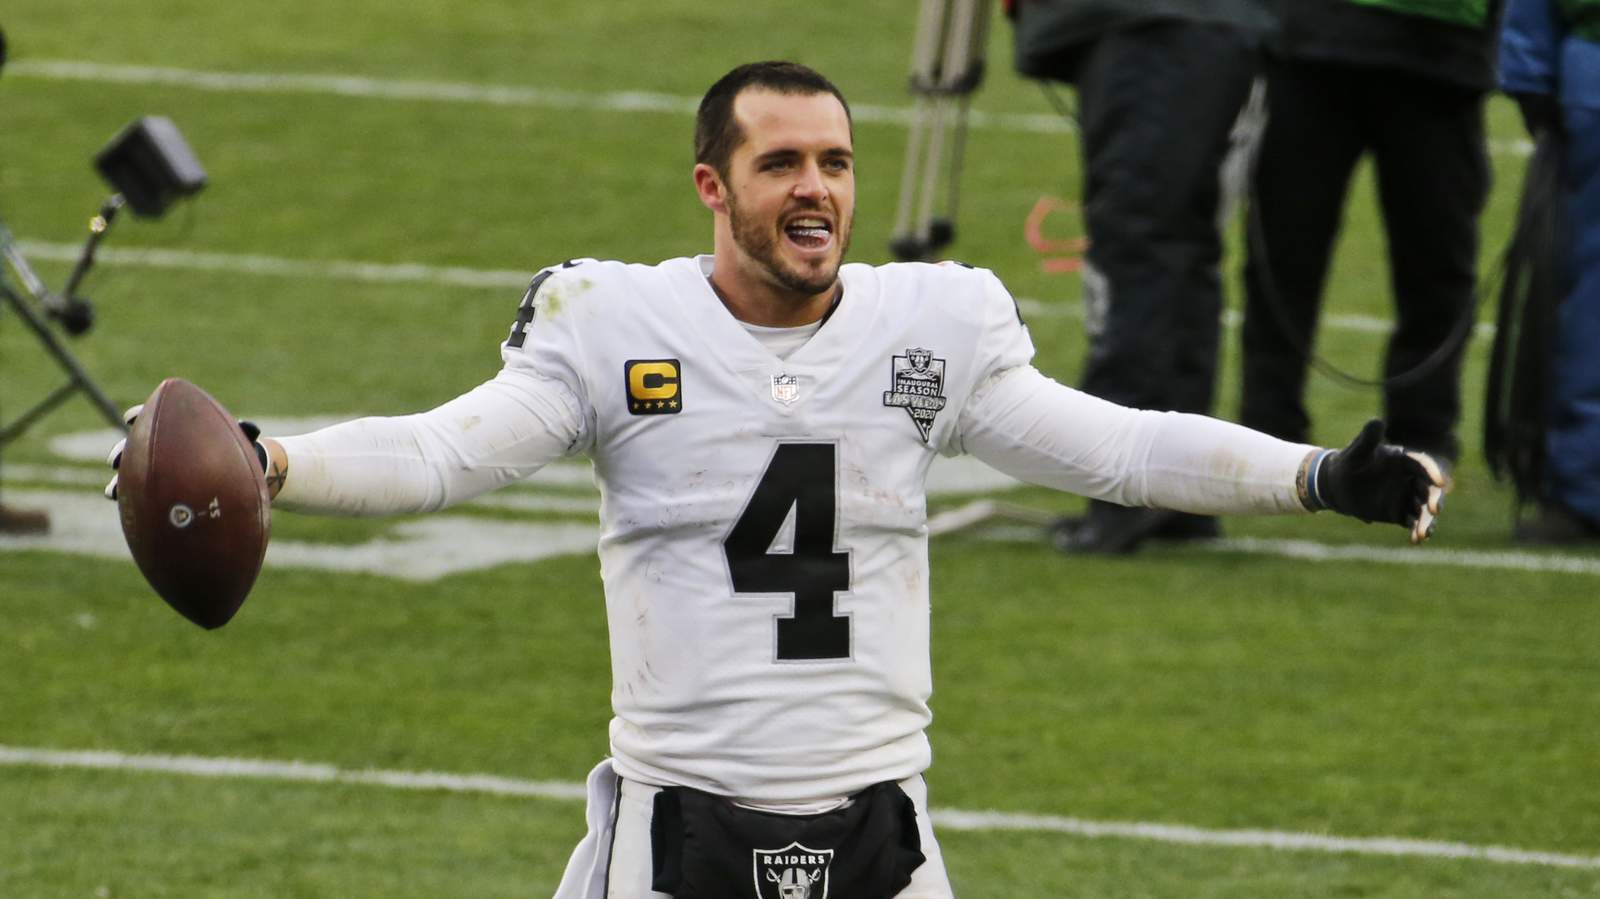 Carr, Raiders overcome windy, wintry weather to down Browns